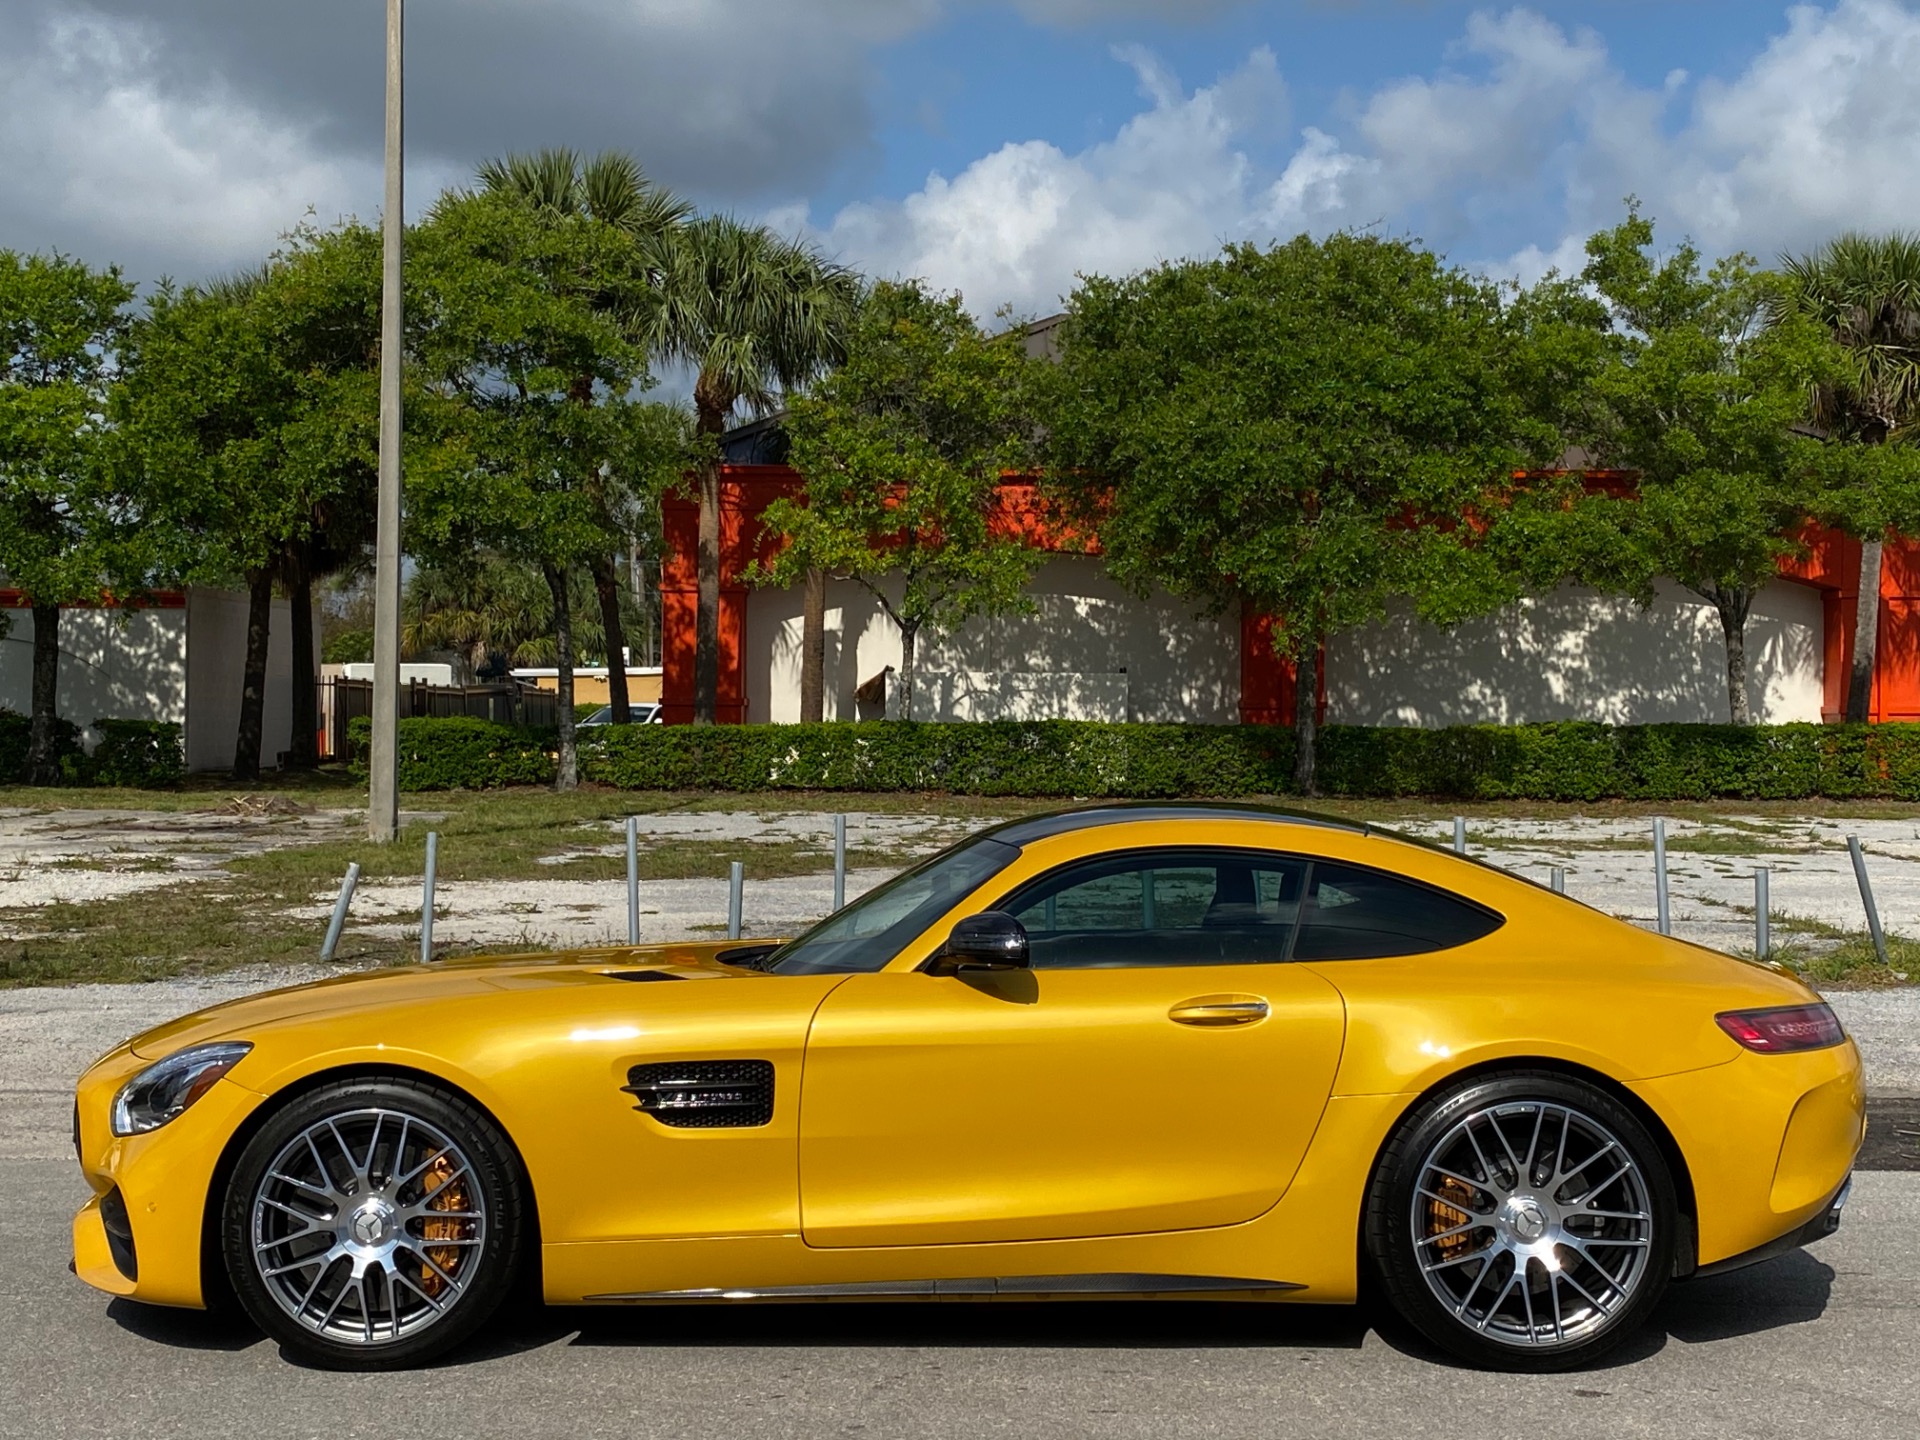 Used 2018 Mercedes Benz AMG GT C For Sale 109 900 Marino 